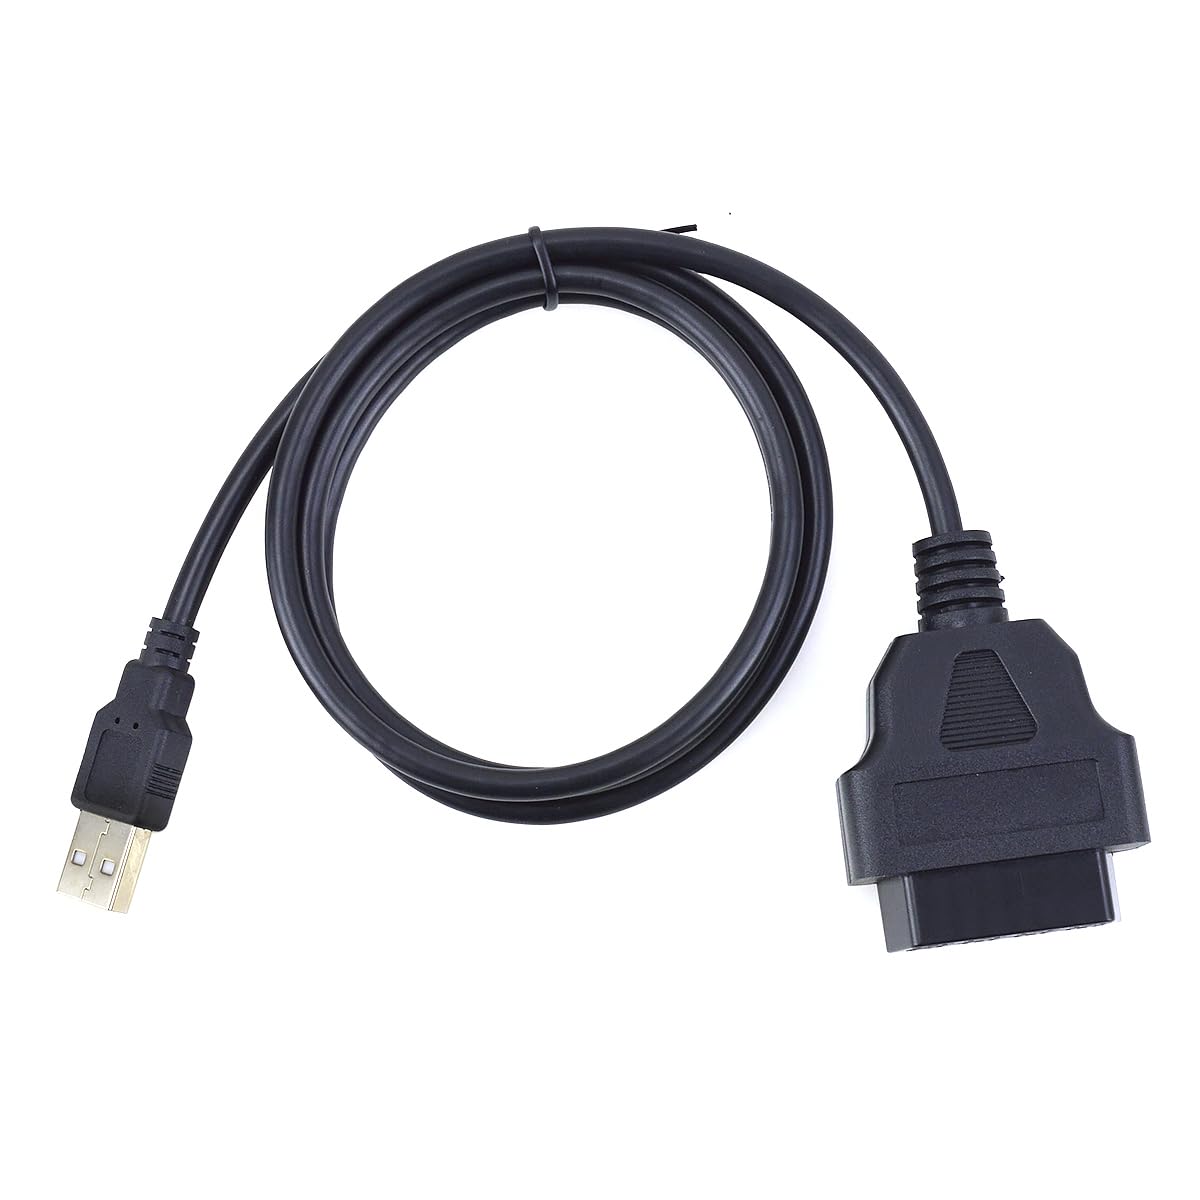 REARMASTER Universal OBD Power Cable for Dash Camera 24 Hours Surveillance / ACC Mode with Switch Button(Micro USB Port)